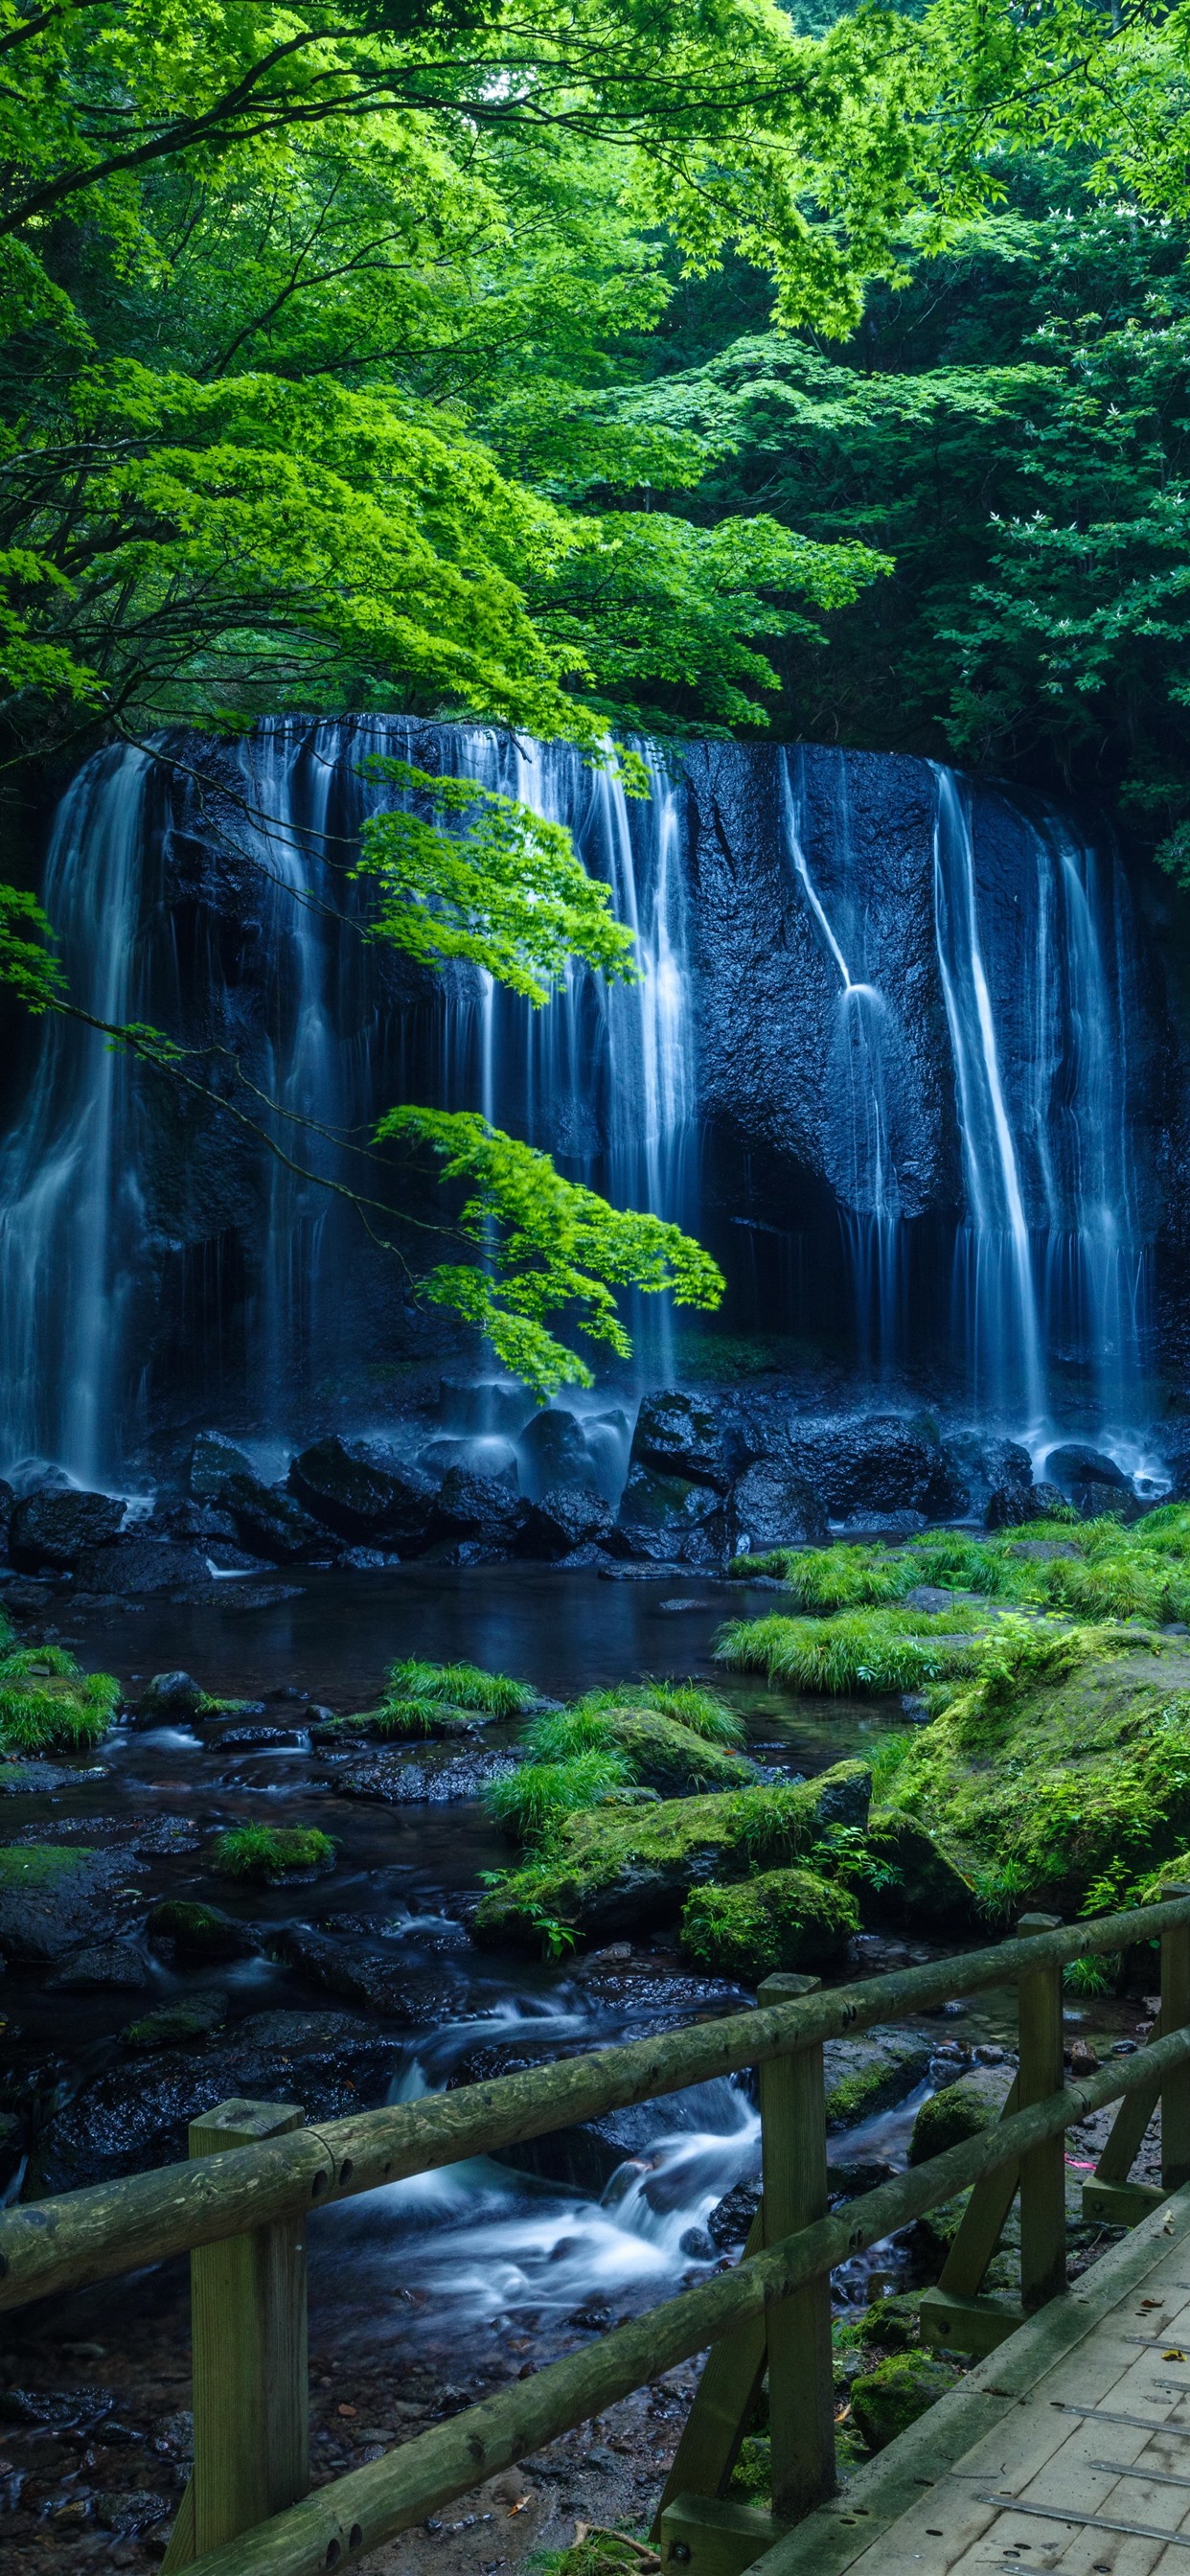 Waterfall, Stream, Trees, Green, Park 1242x2688 IPhone 11 Pro XS Max Wallpaper, Background, Picture, Image